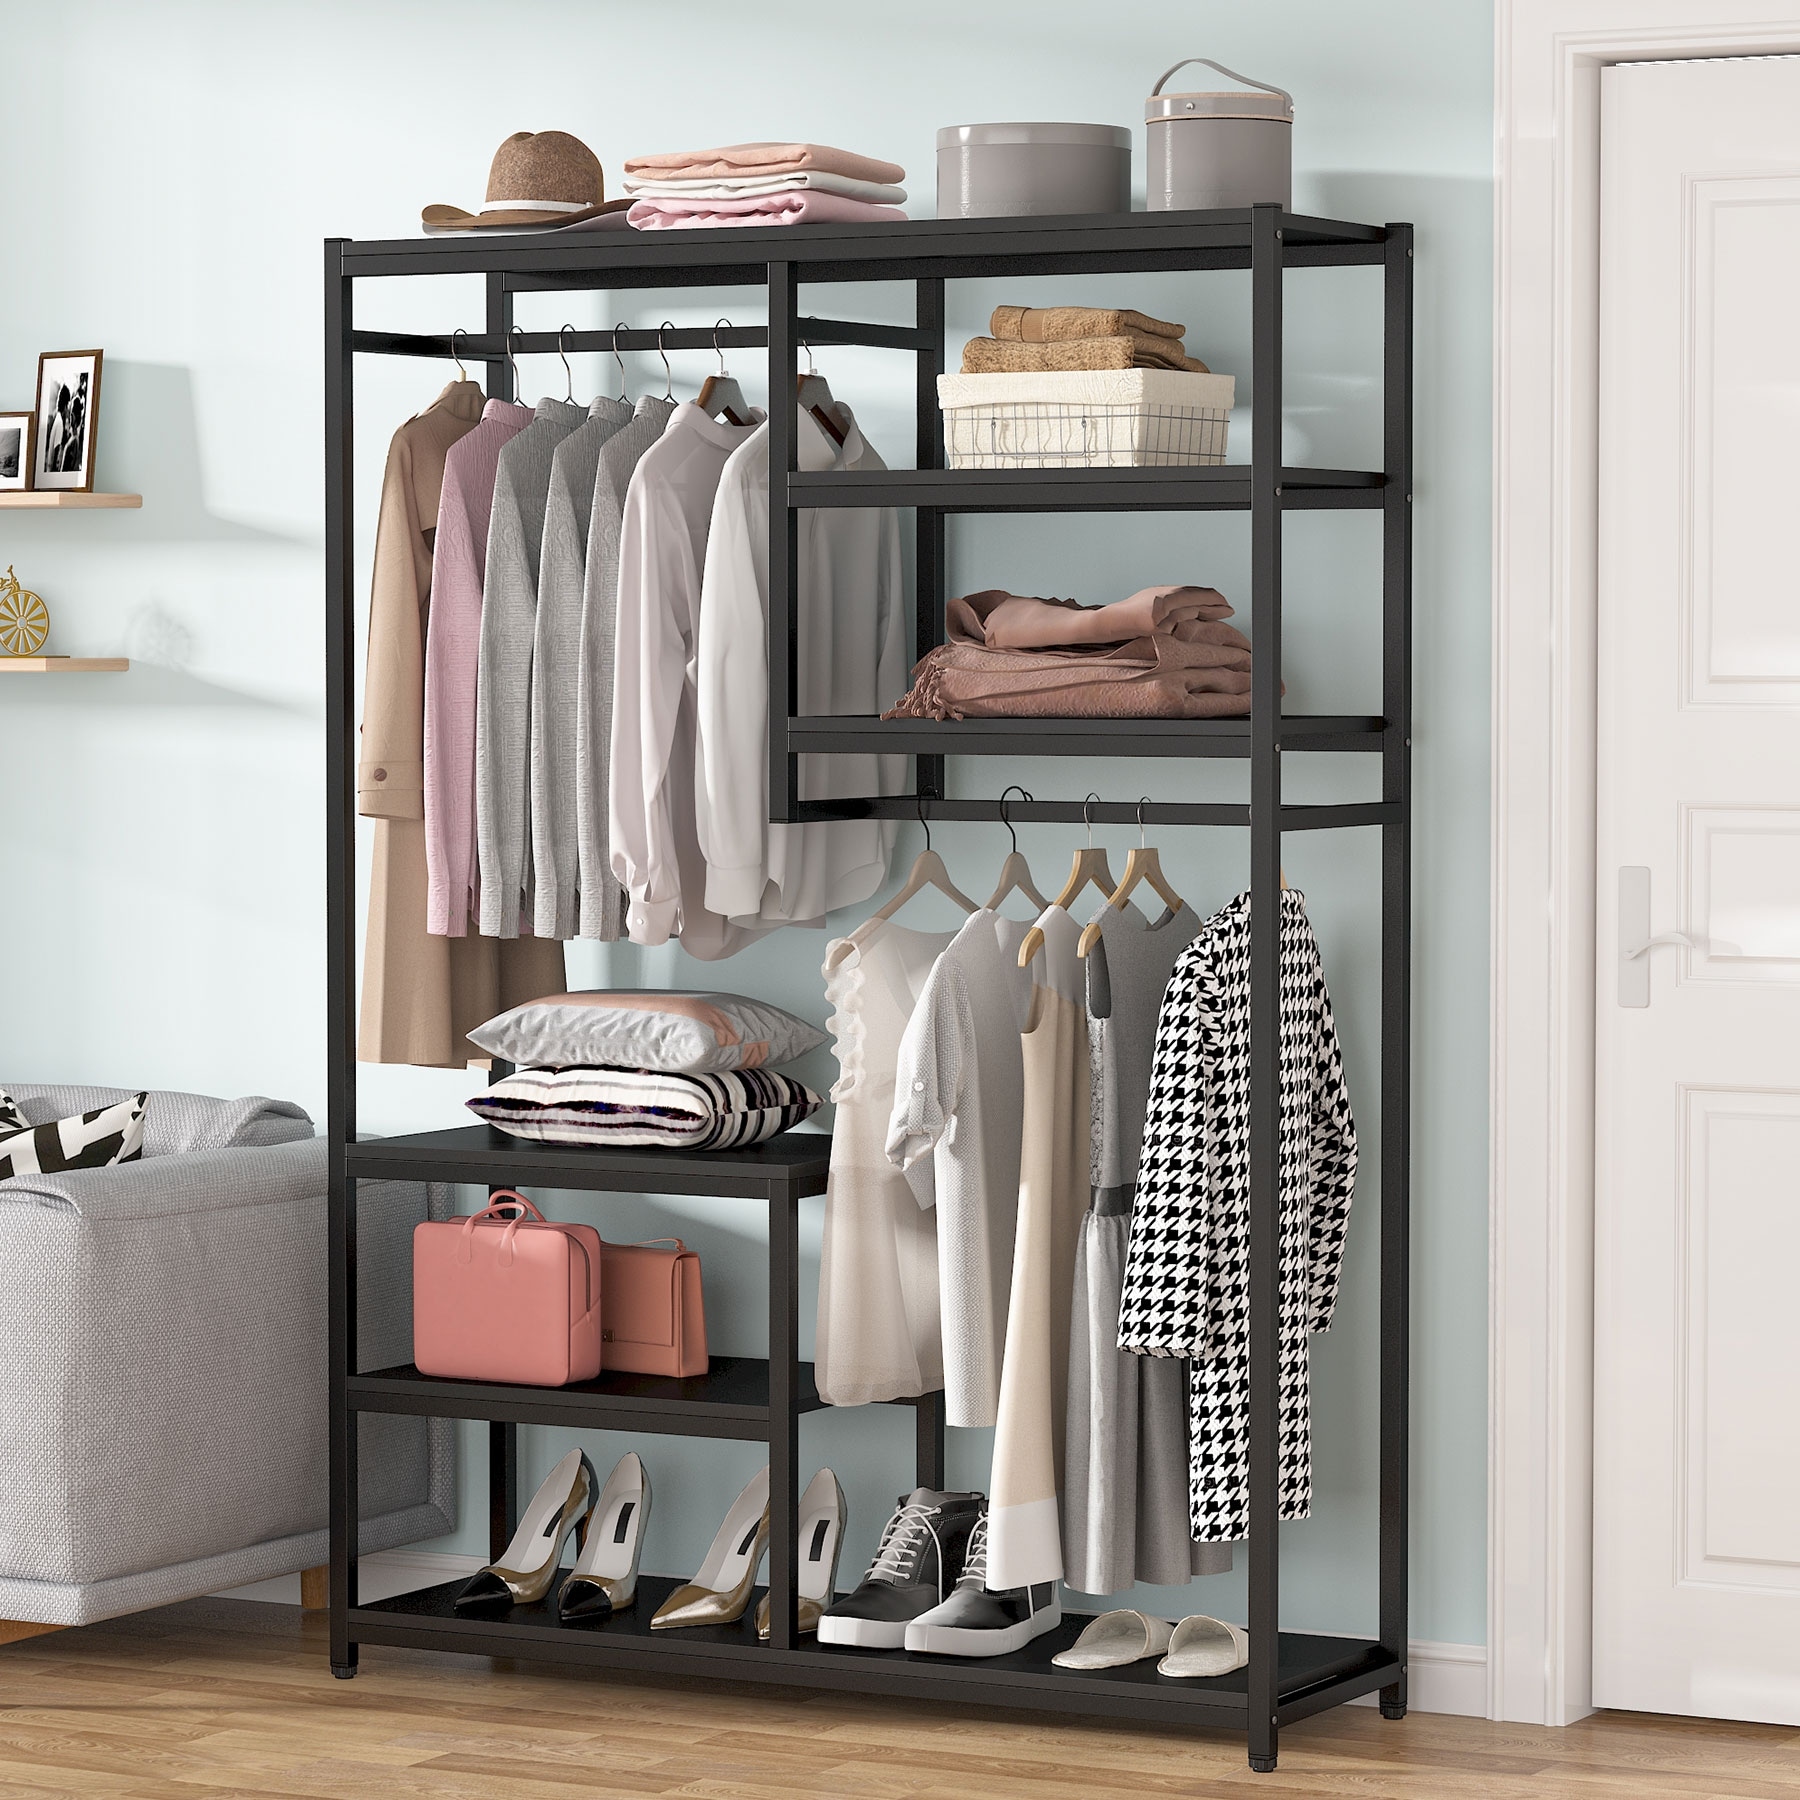 https://ak1.ostkcdn.com/images/products/is/images/direct/29533e806b167e182e9da48fd4ab8ebebcbc2156/Large-closet-organizer-Double-Hanging-Rod-Clothes-Garment-Racks-with-Storage-Shelves.jpg